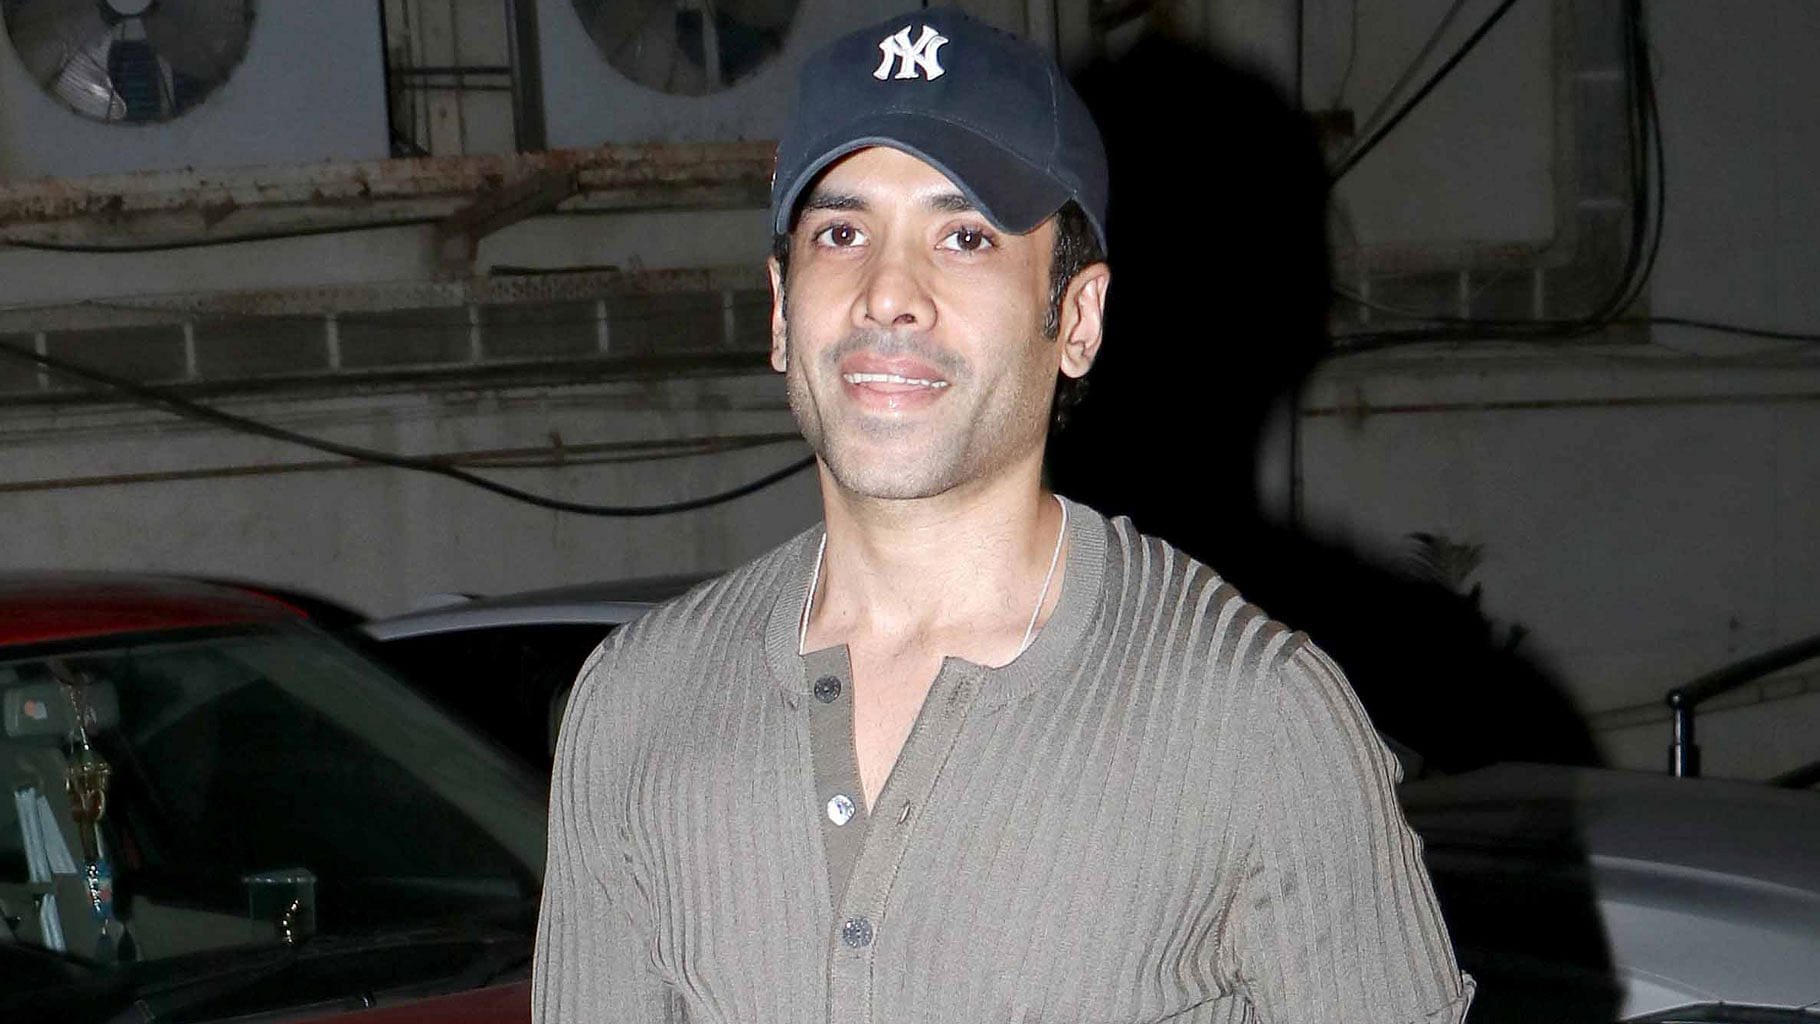 Tusshar Kapoor becomes India’s first single surrogate dad. (Photo: Yogen Shah)